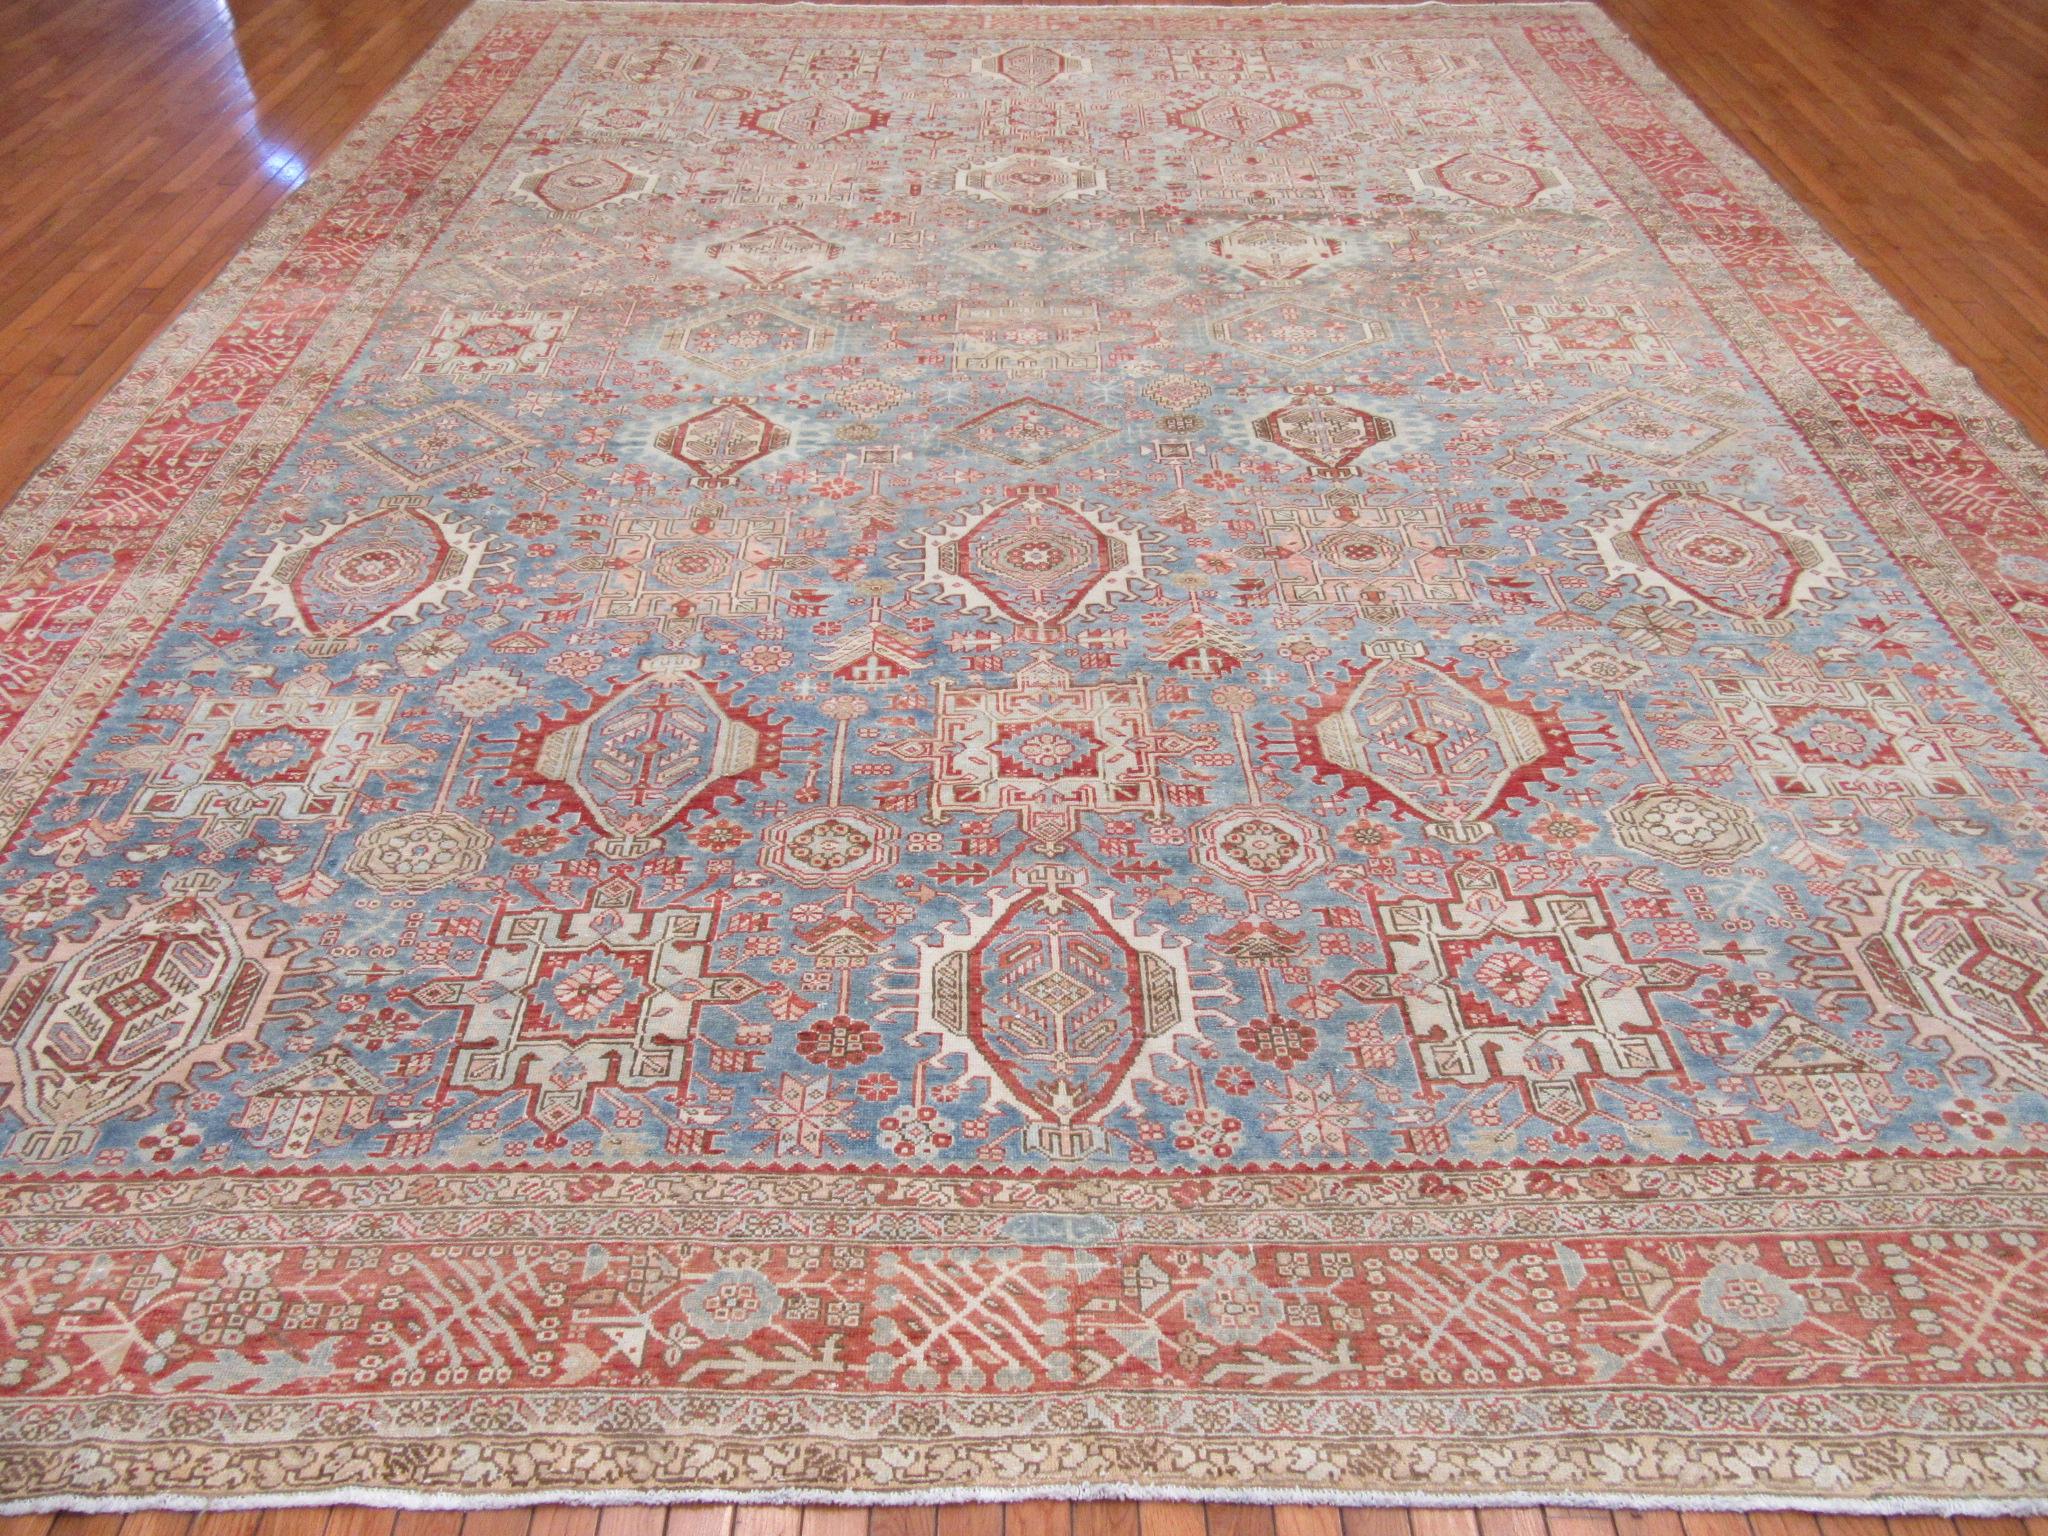 This is an antique hand knotted Persian Karajeh rug . It has been antique washed to reduce the colors and light distressed look. The rug has the traditional all-over pattern with repetitive geometric medallions that is the trade mark of the Karajeh